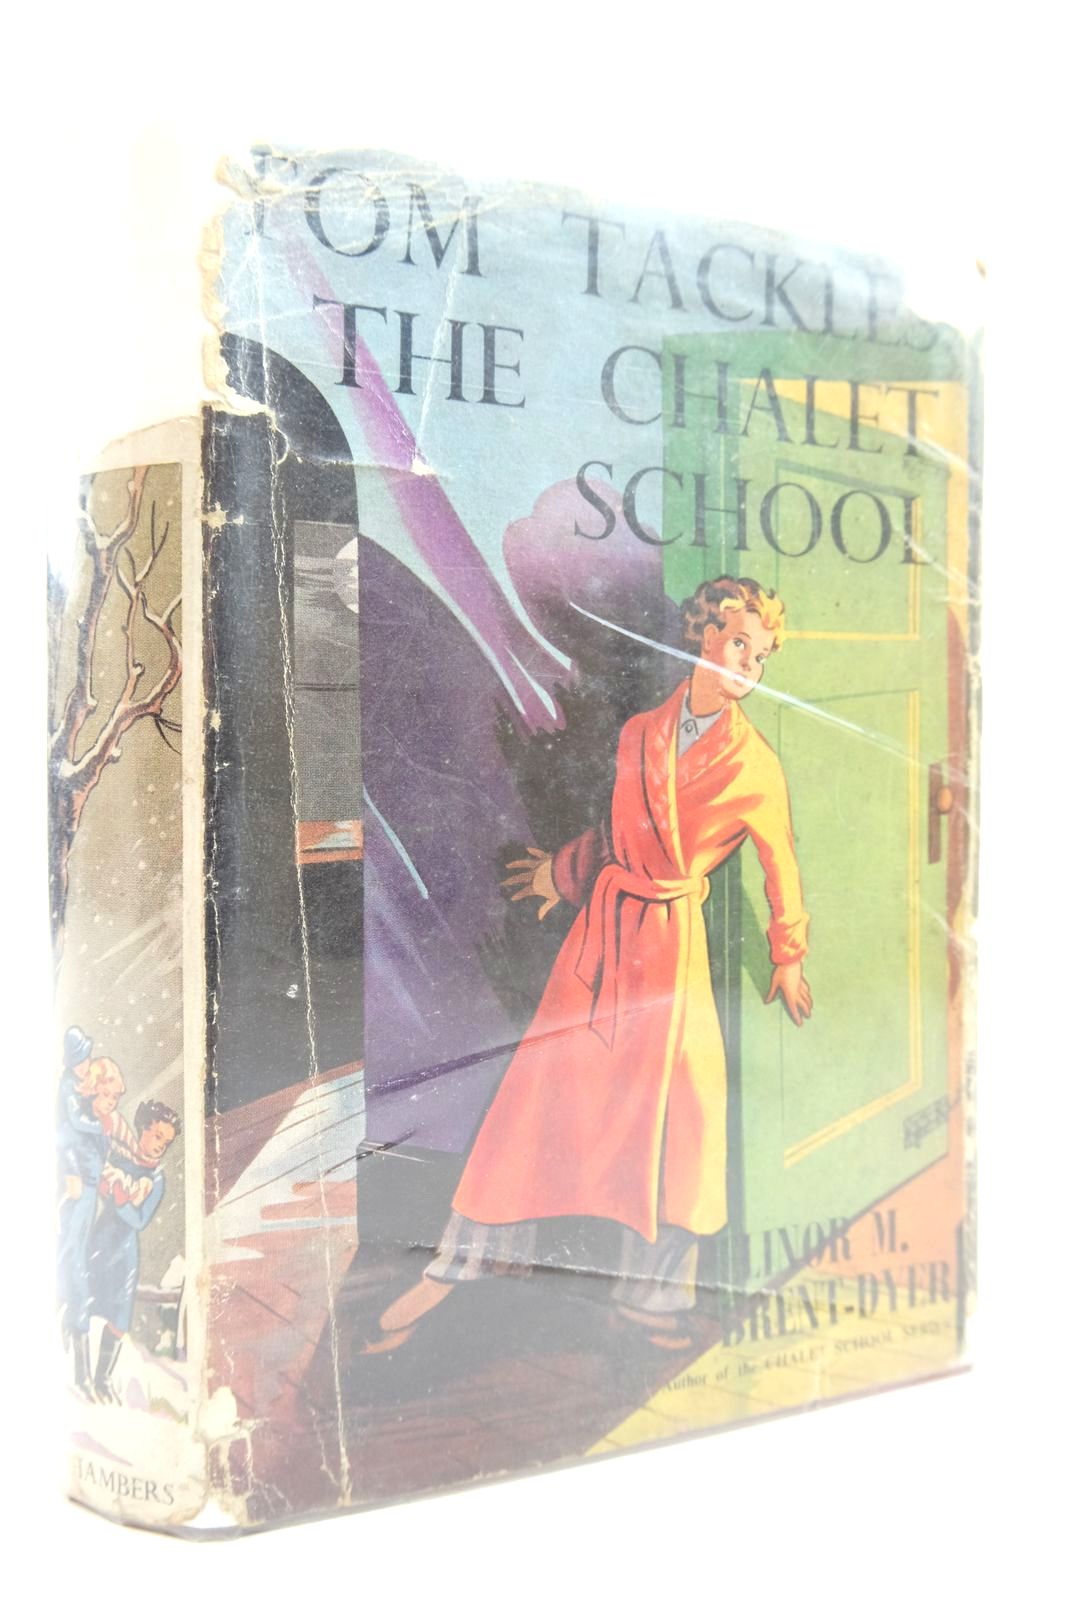 Photo of TOM TACKLES THE CHALET SCHOOL written by Brent-Dyer, Elinor M. published by W. &amp; R. Chambers Limited (STOCK CODE: 2140017)  for sale by Stella & Rose's Books